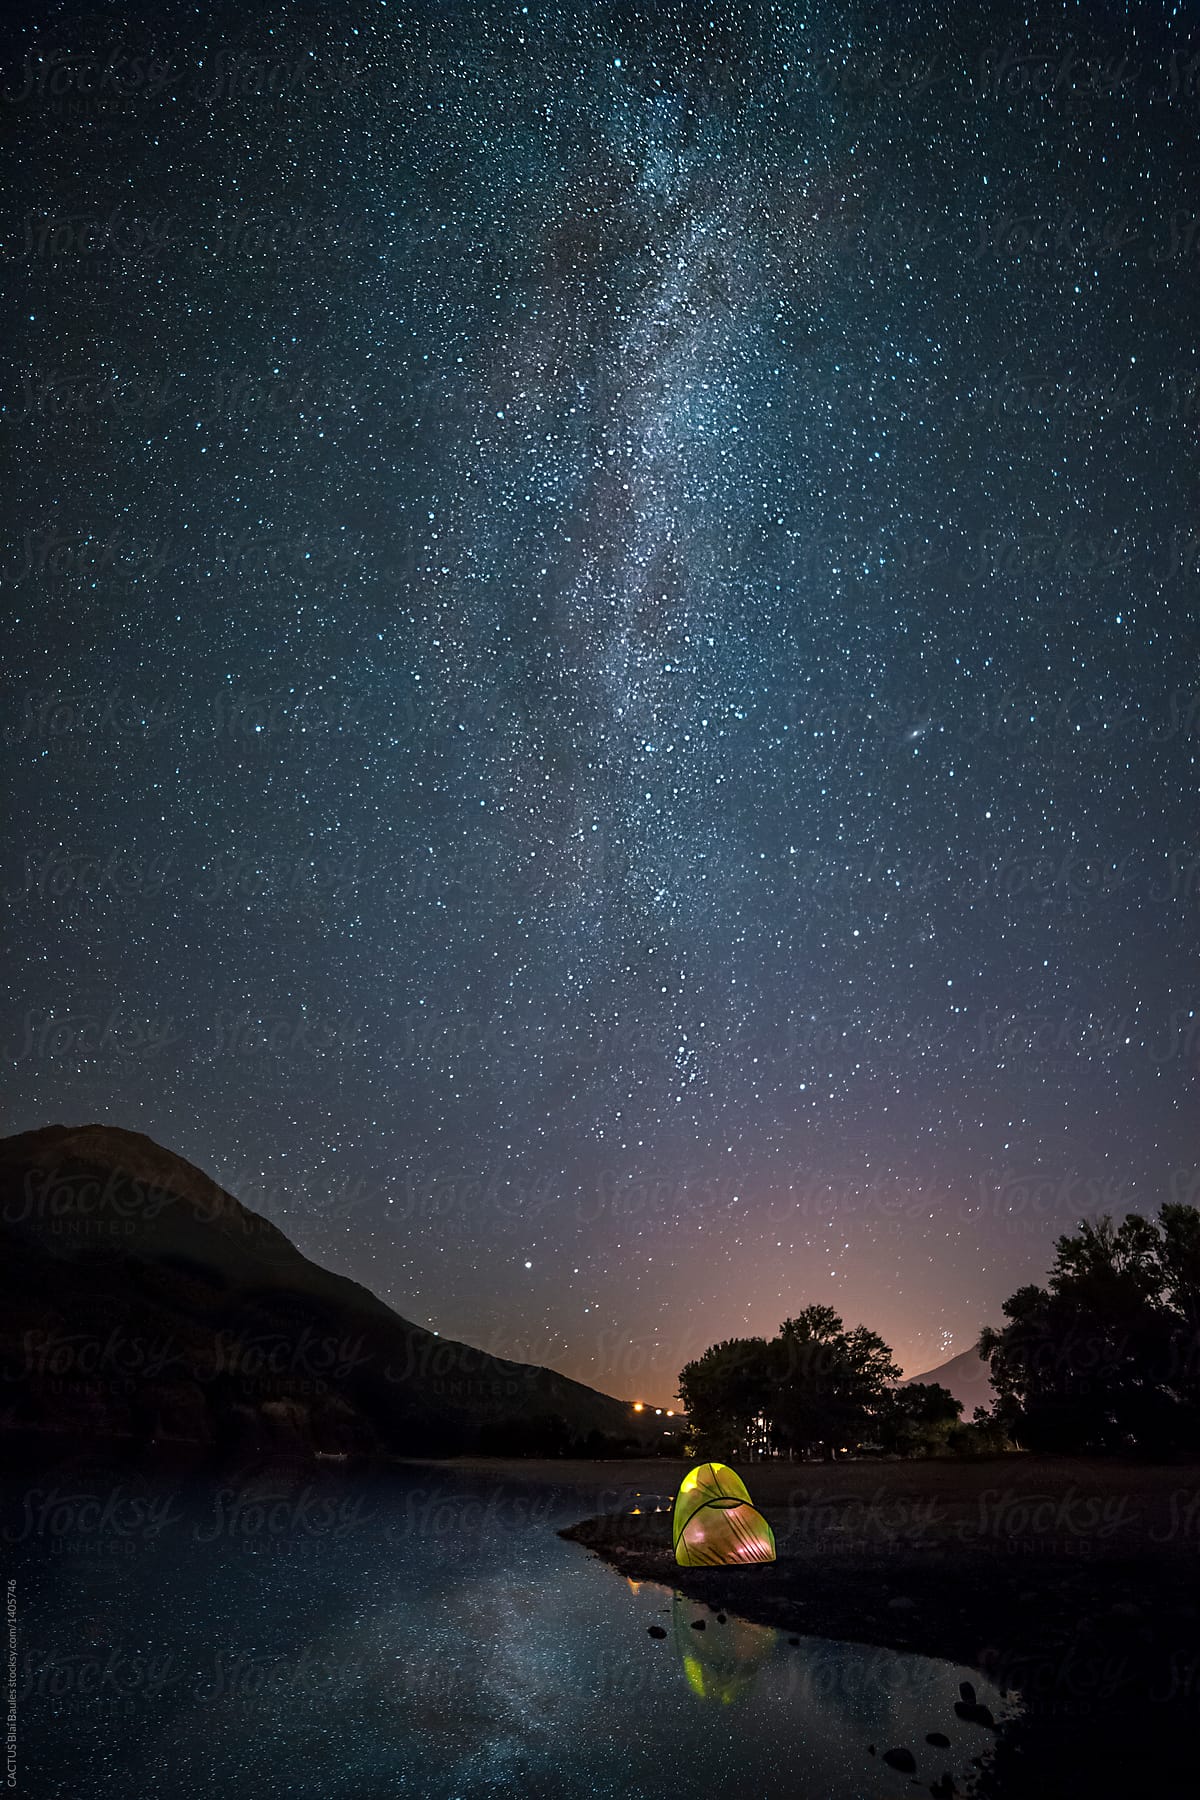 A tent on the lake beach under the milky way